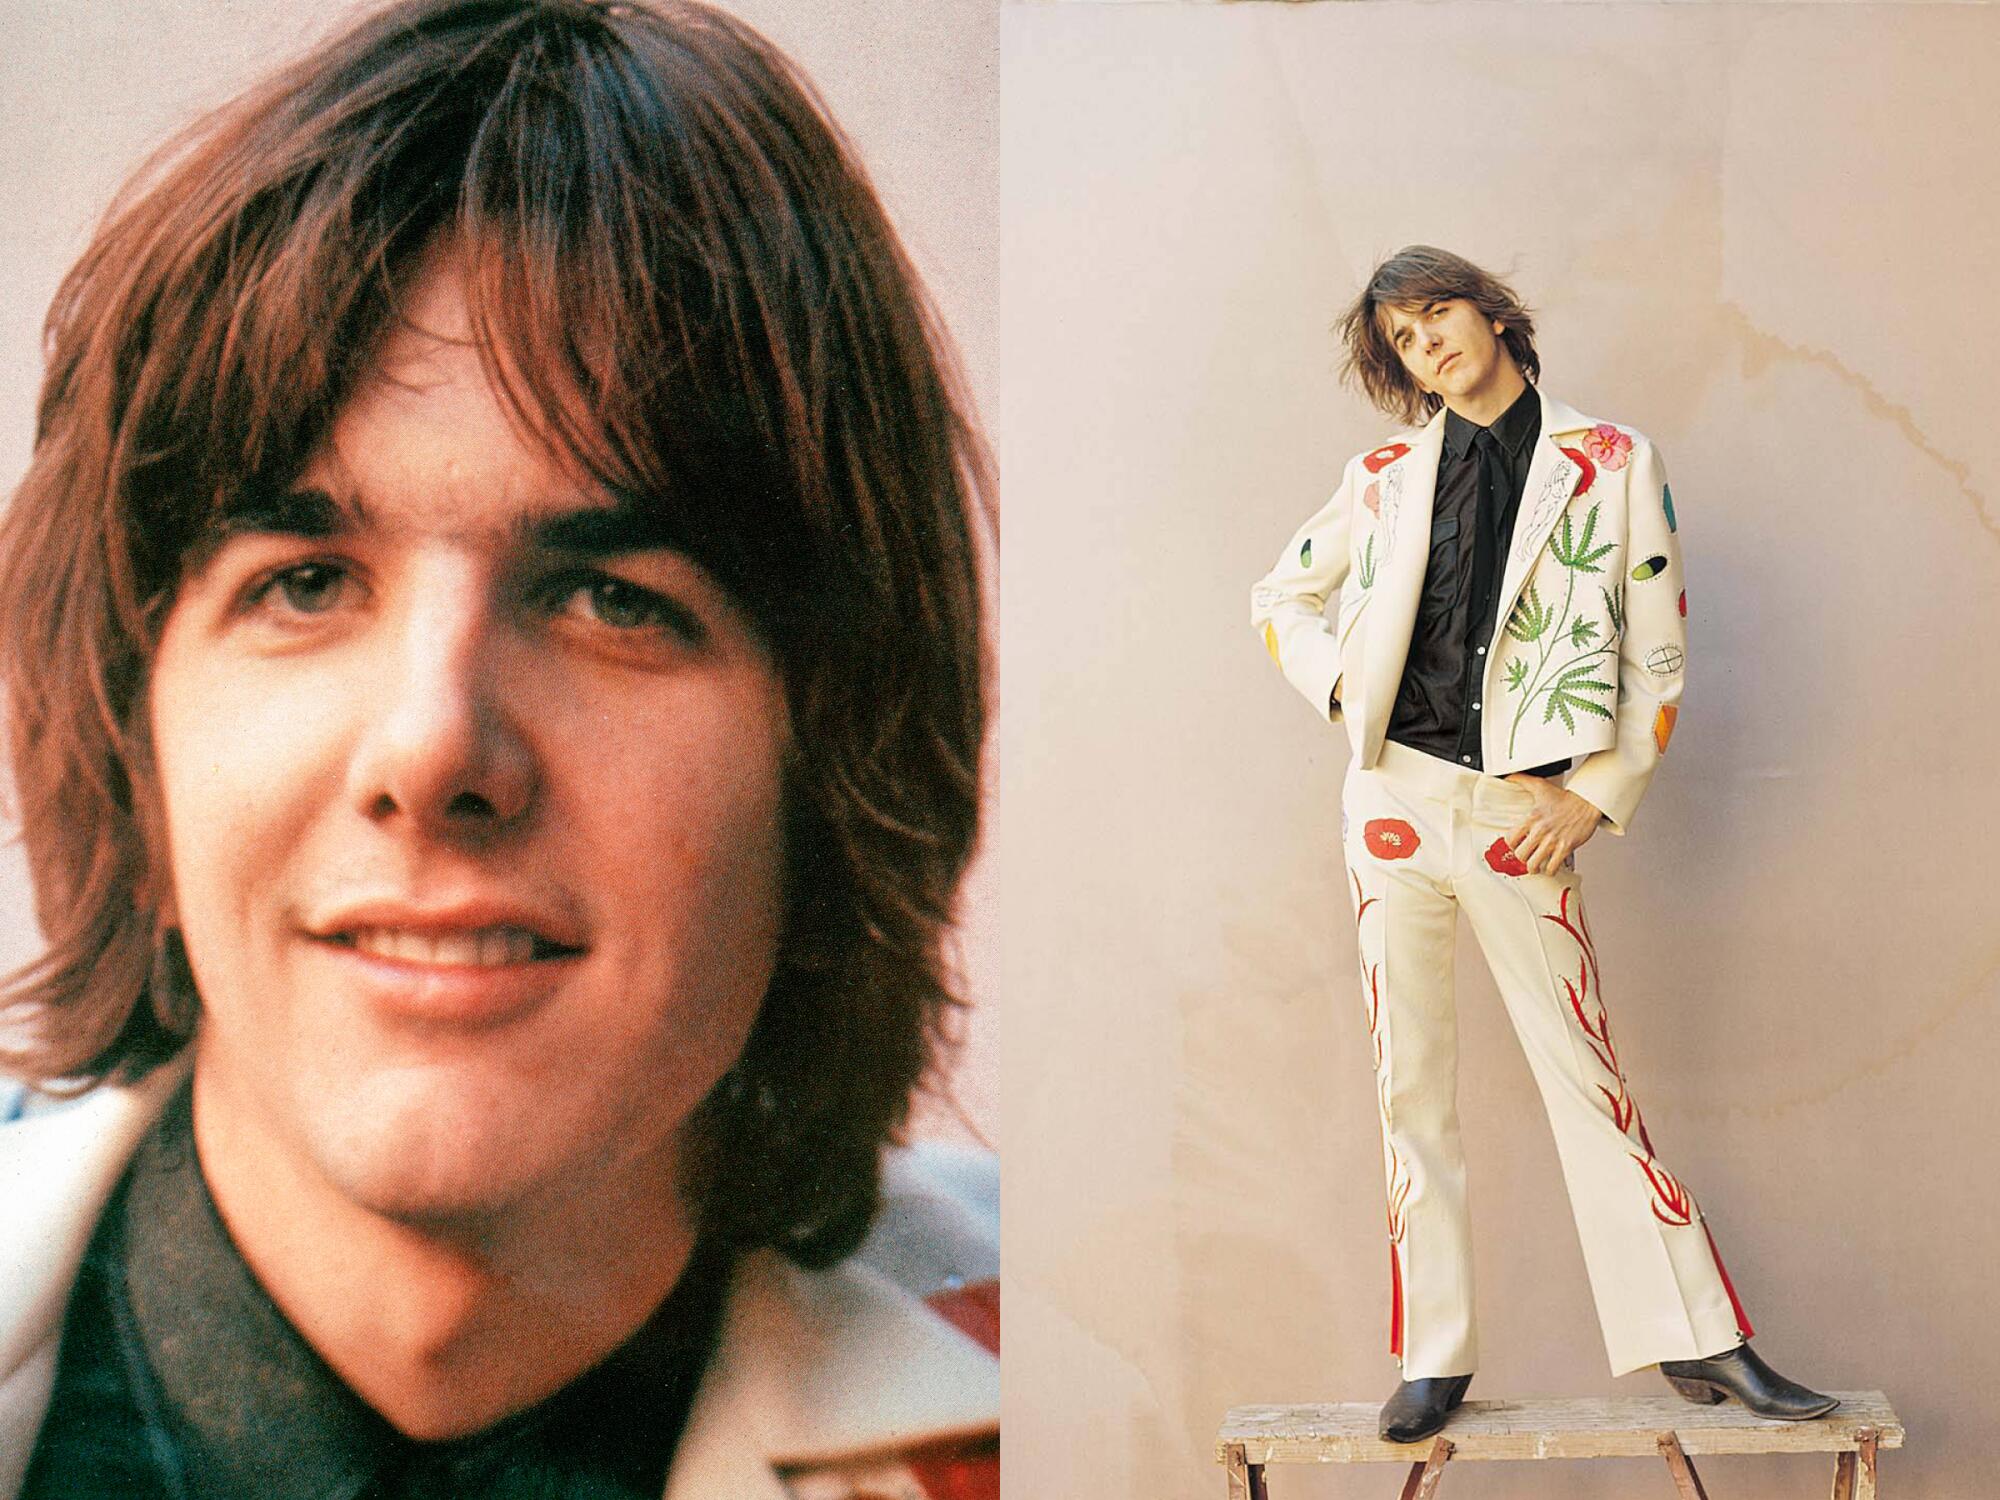 Portraits of Gram Parsons during his music career.